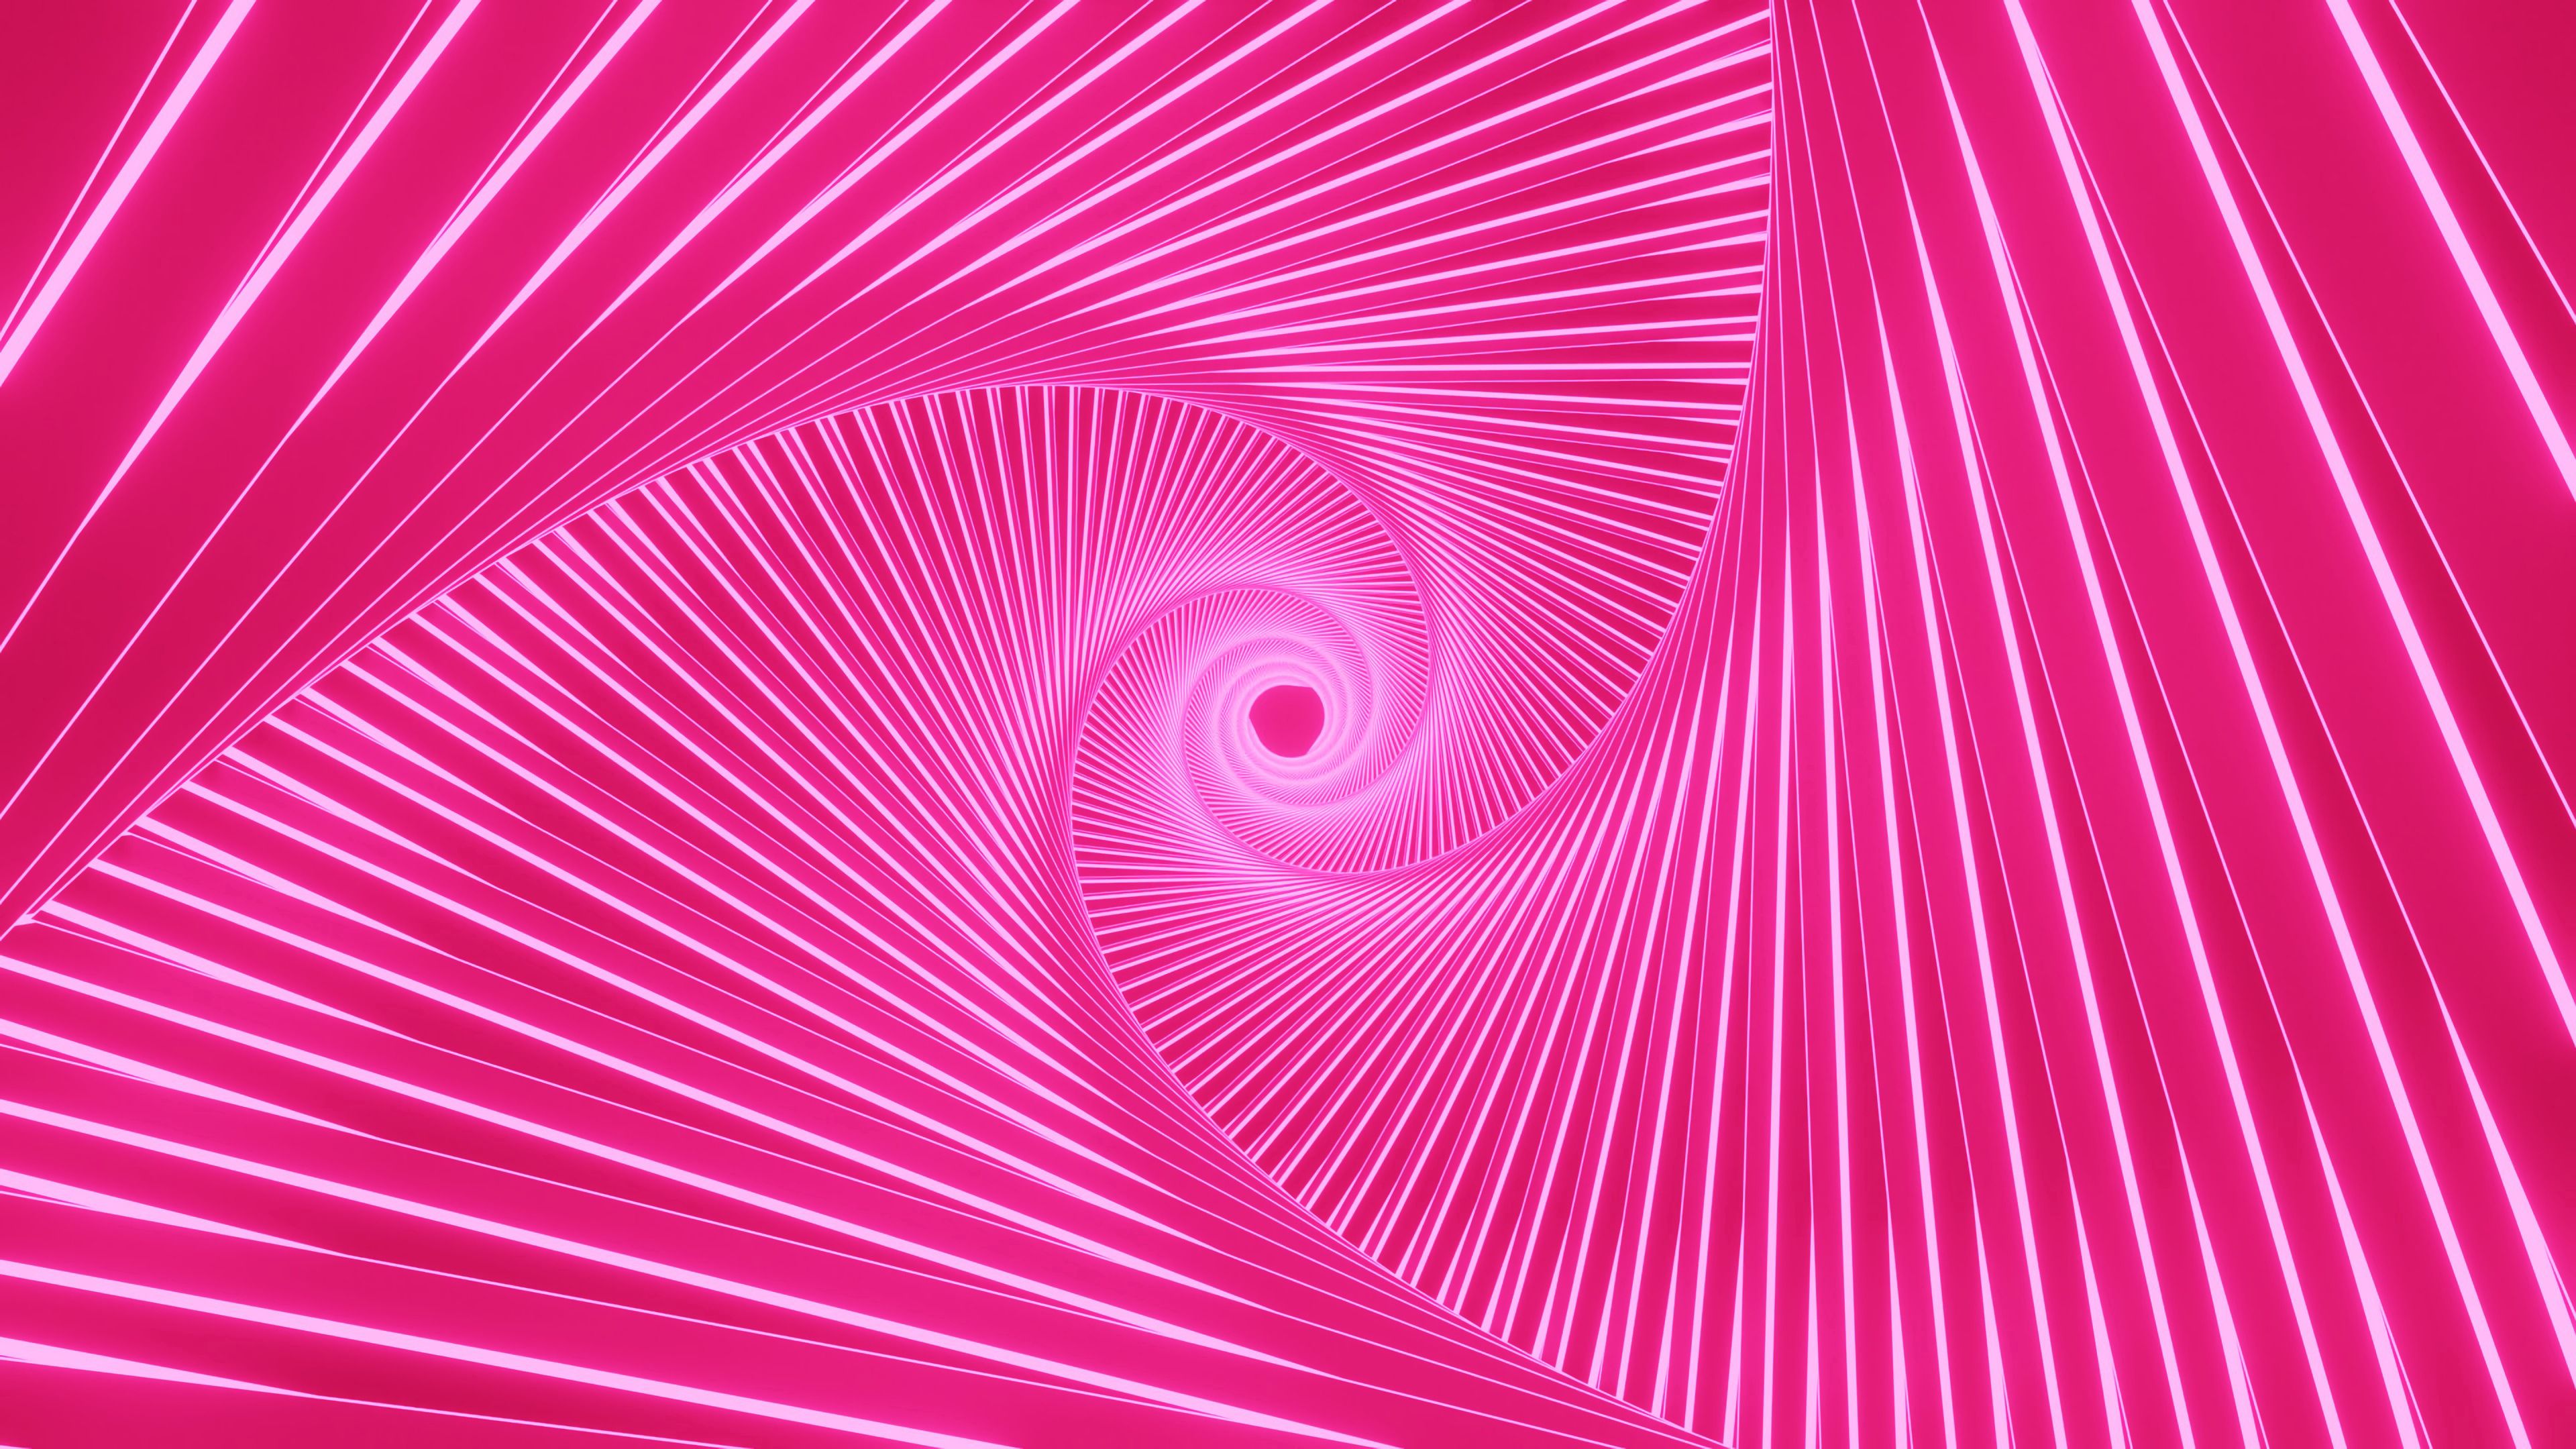 vertical wallpaper pink, abstract, bright, glow, funnel, swirling, involute